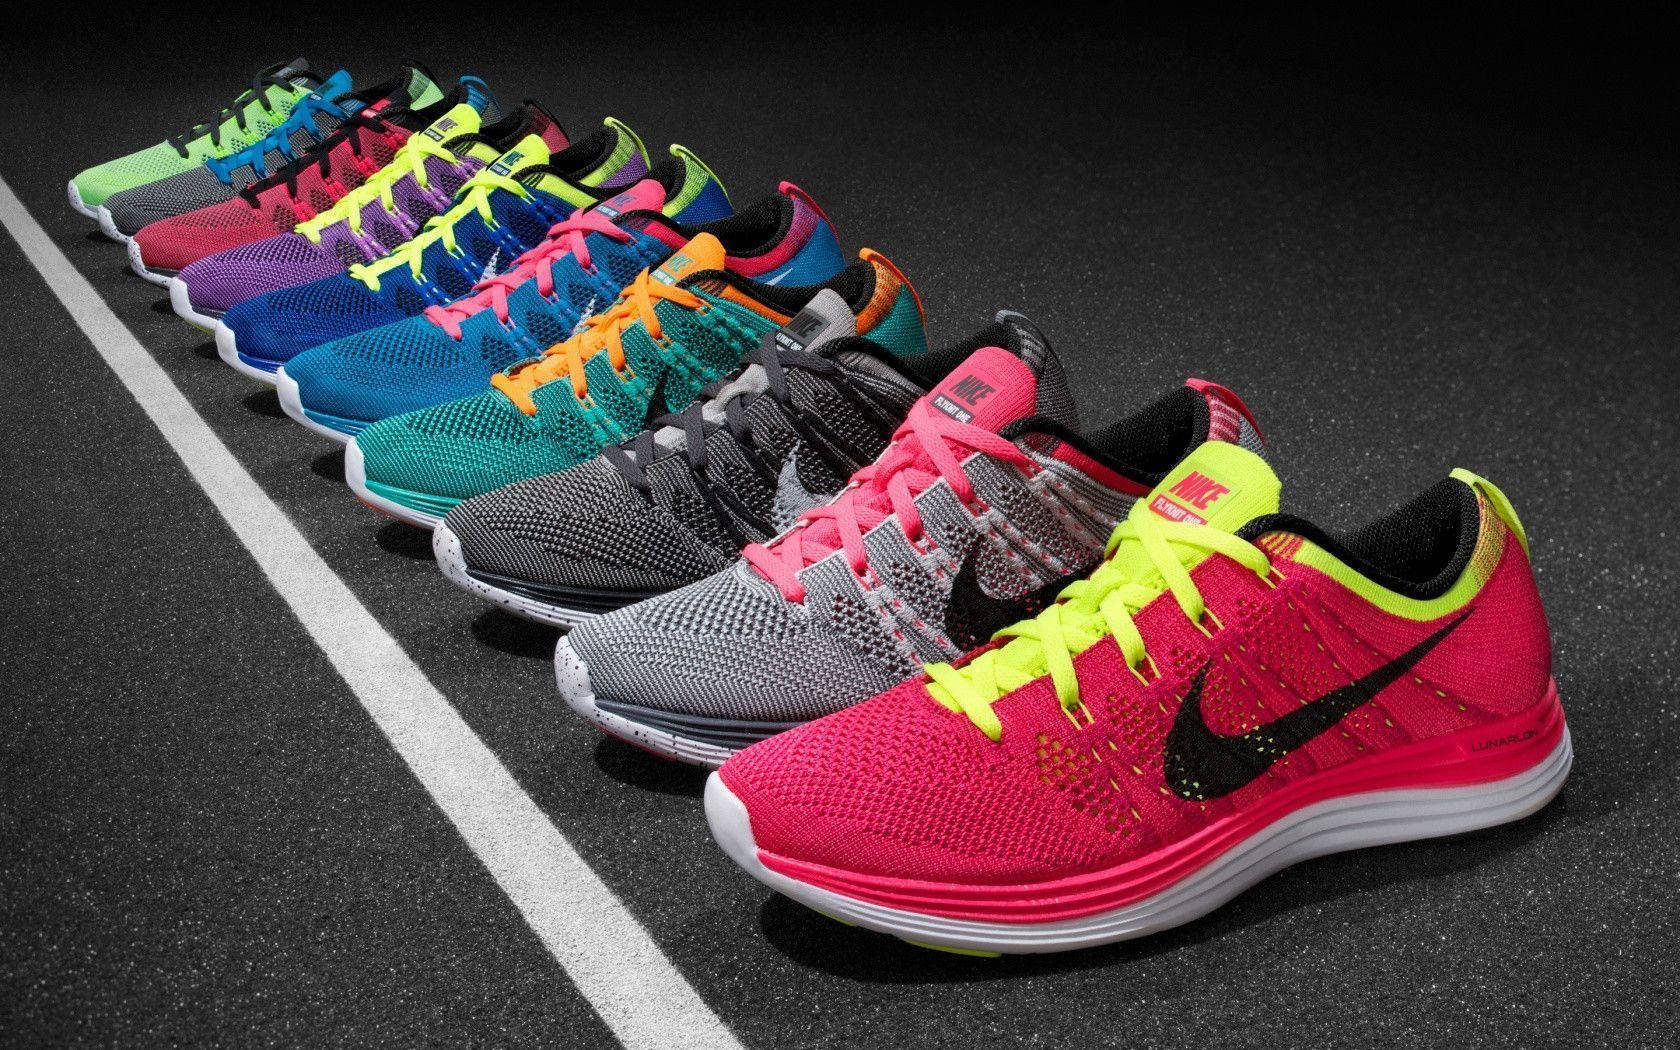 Nike Lunar Flyknit Running Shoes In Different Colors Wallpaper